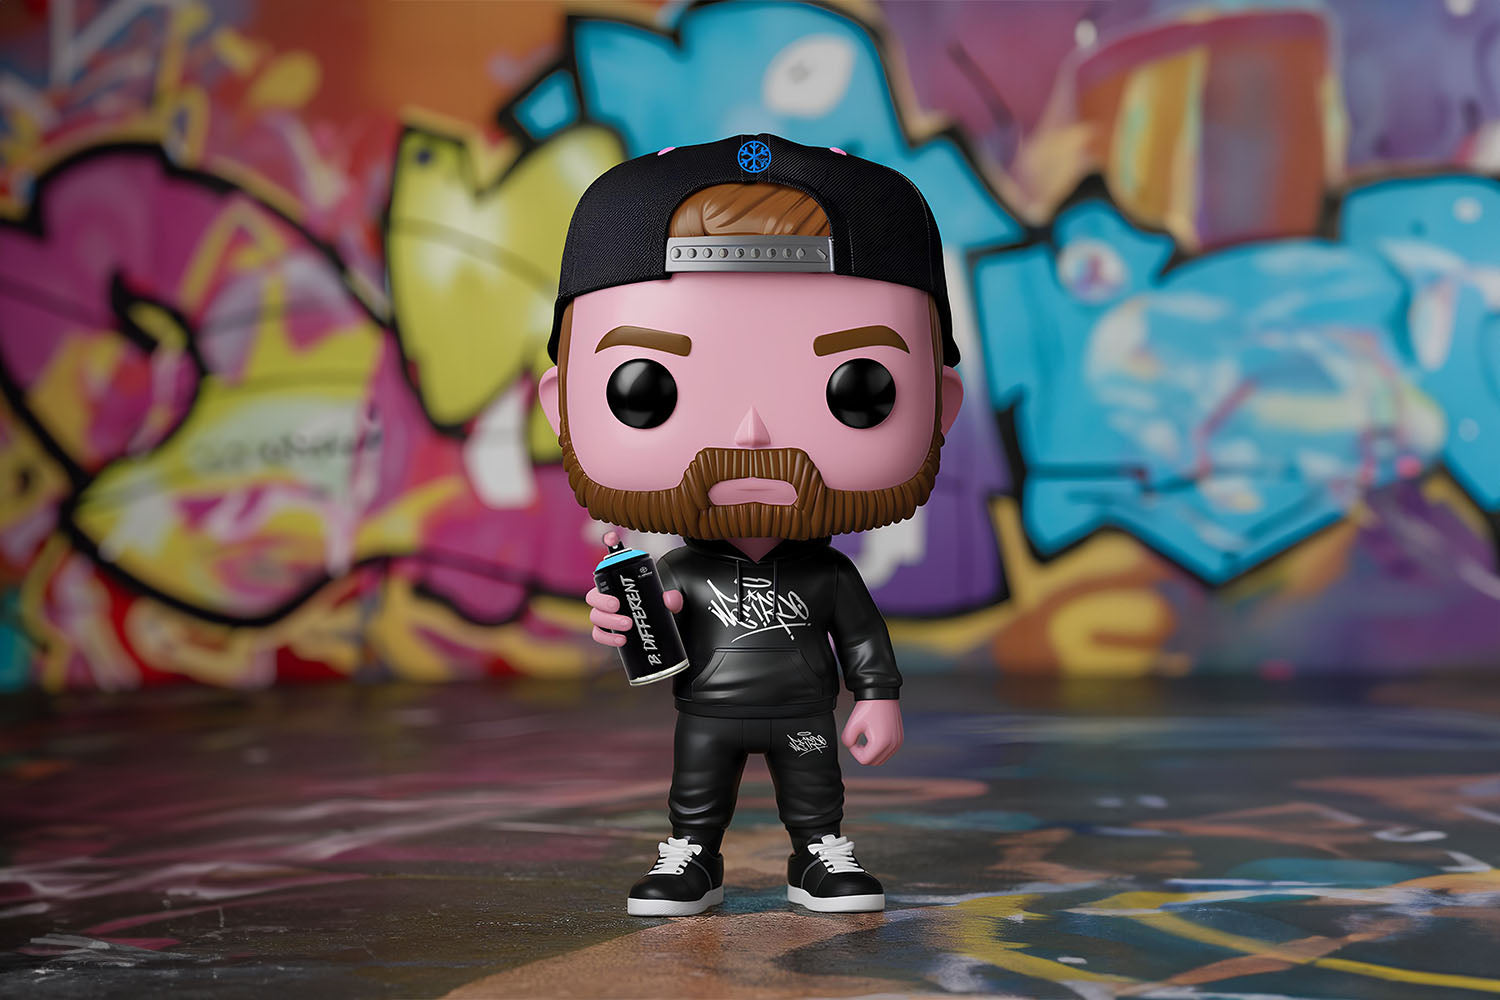 graffiti artist vinyl figure clothing collection by B.Different Clothing graffiti street art inspired independent streetwear brand.